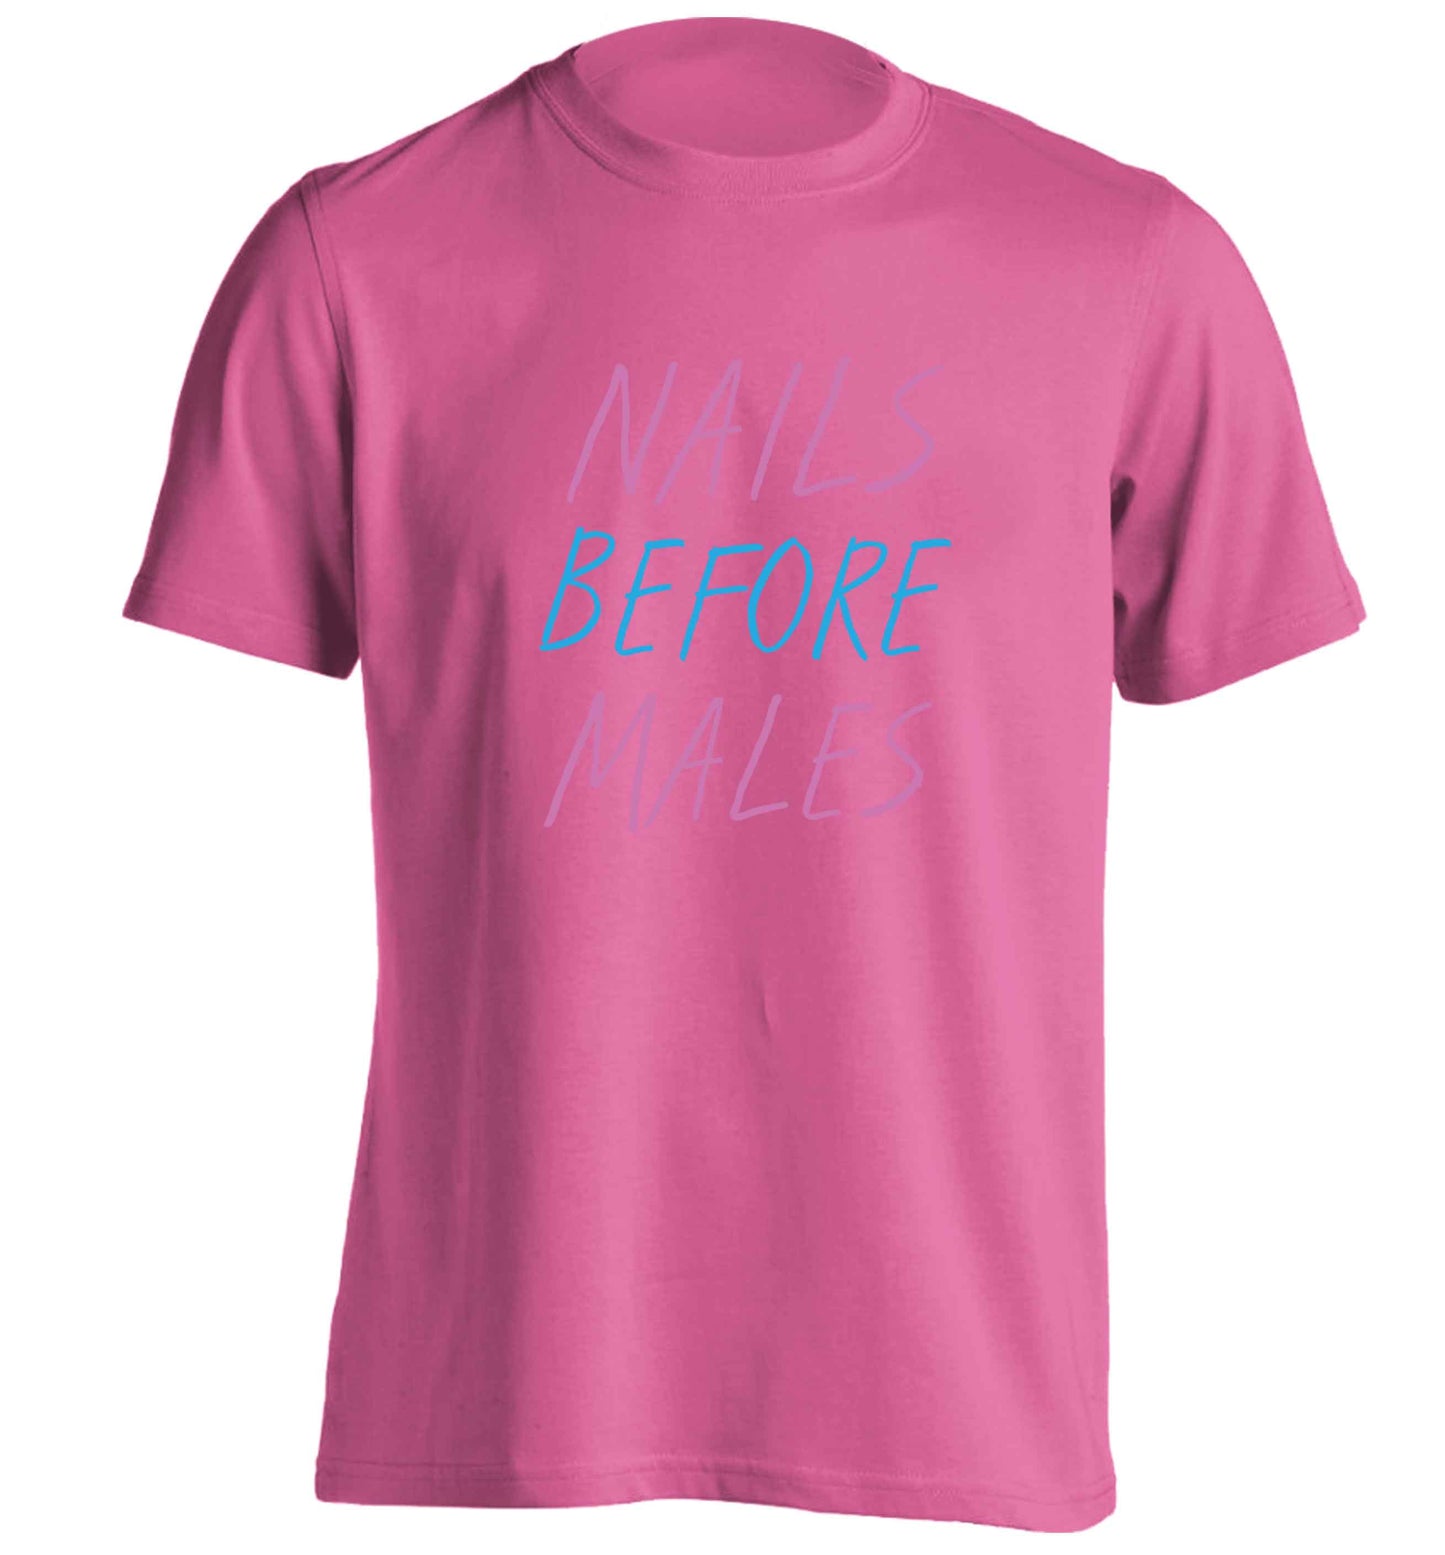 Nails before males adults unisex pink Tshirt 2XL